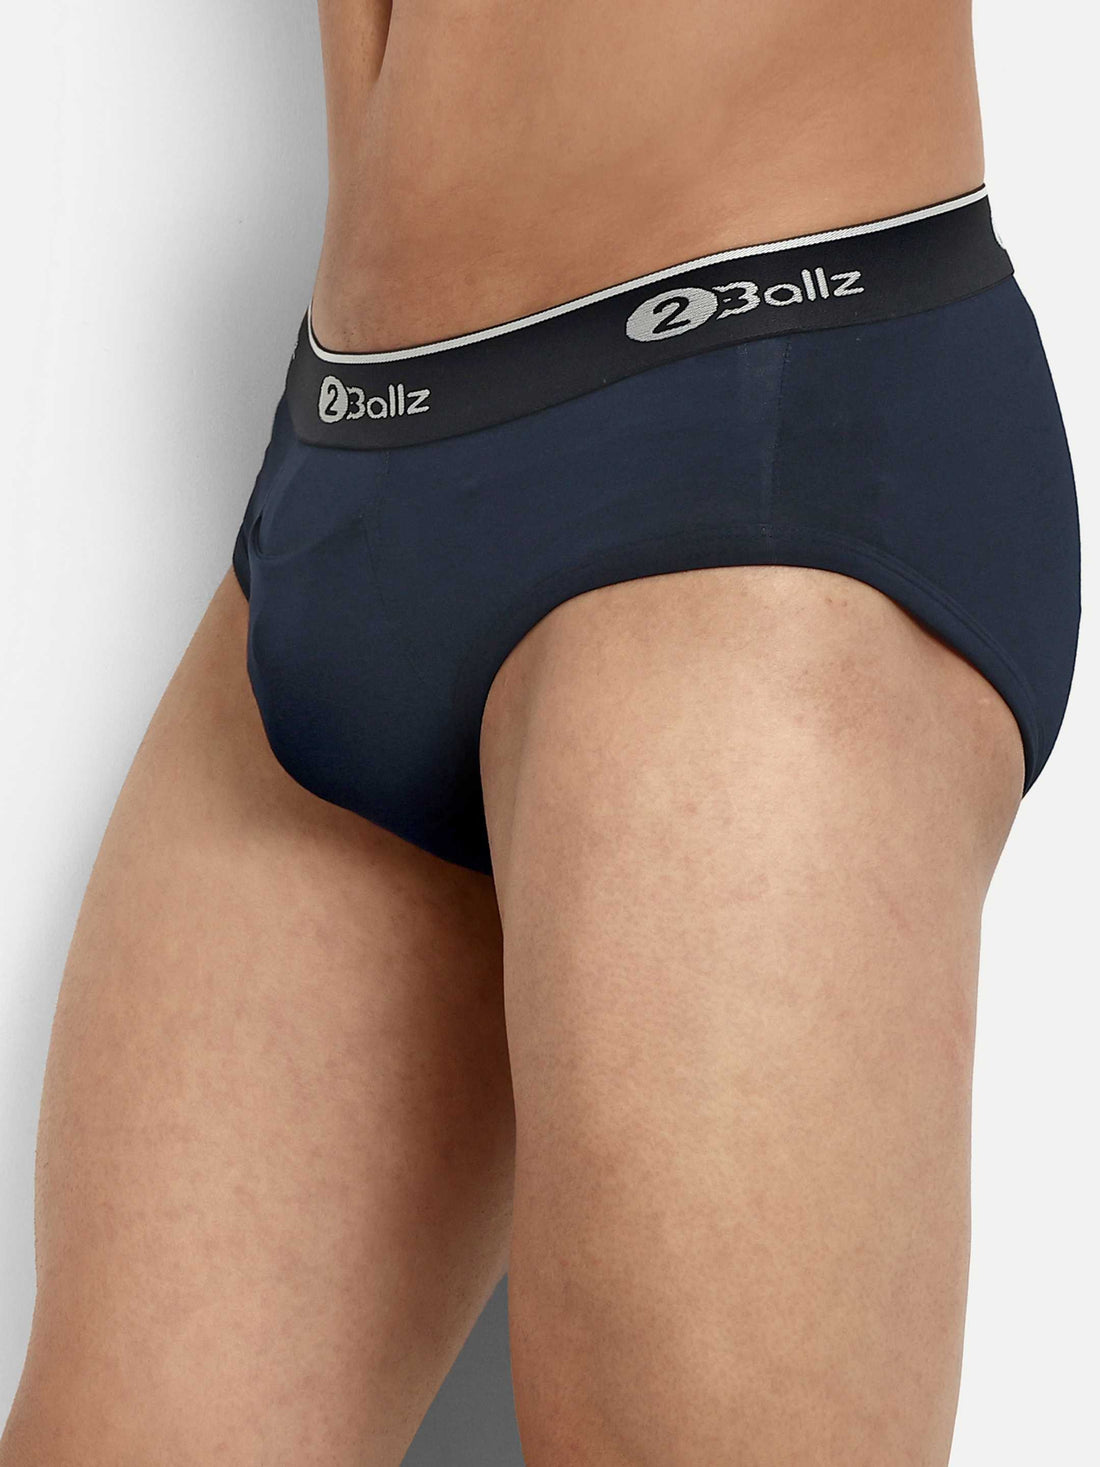 2Ballz Advance Brief With Pouch (Pack of 2)